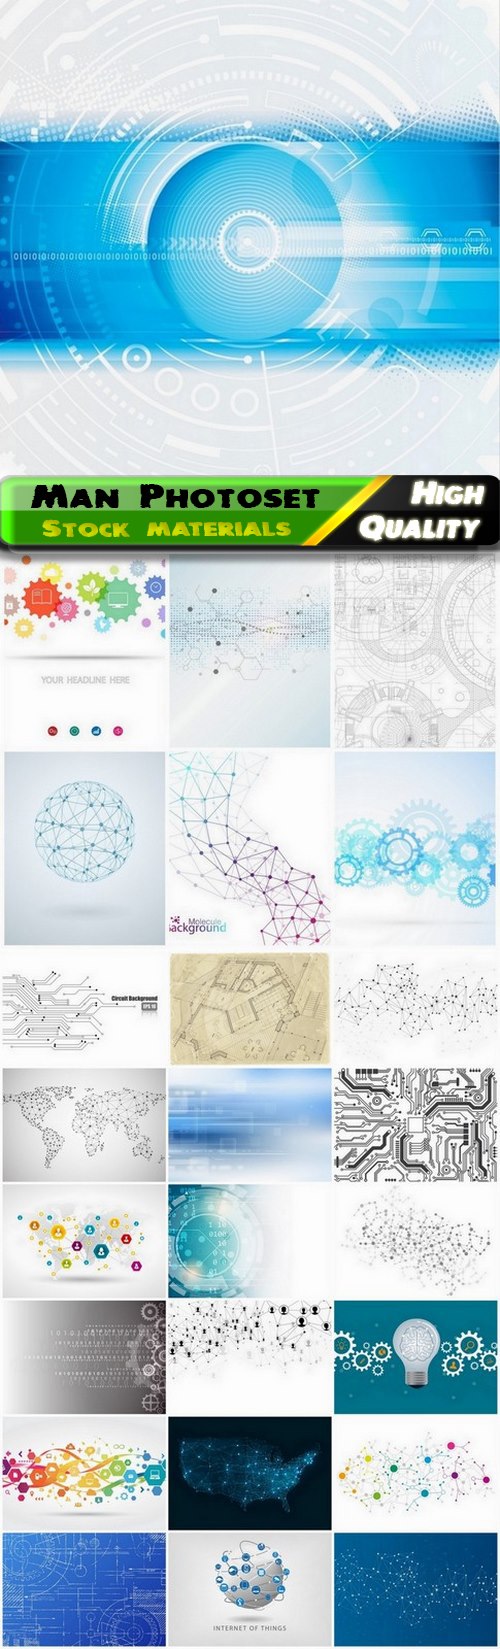 Abstract futuristic technological background with gear and drawings - 25 Eps